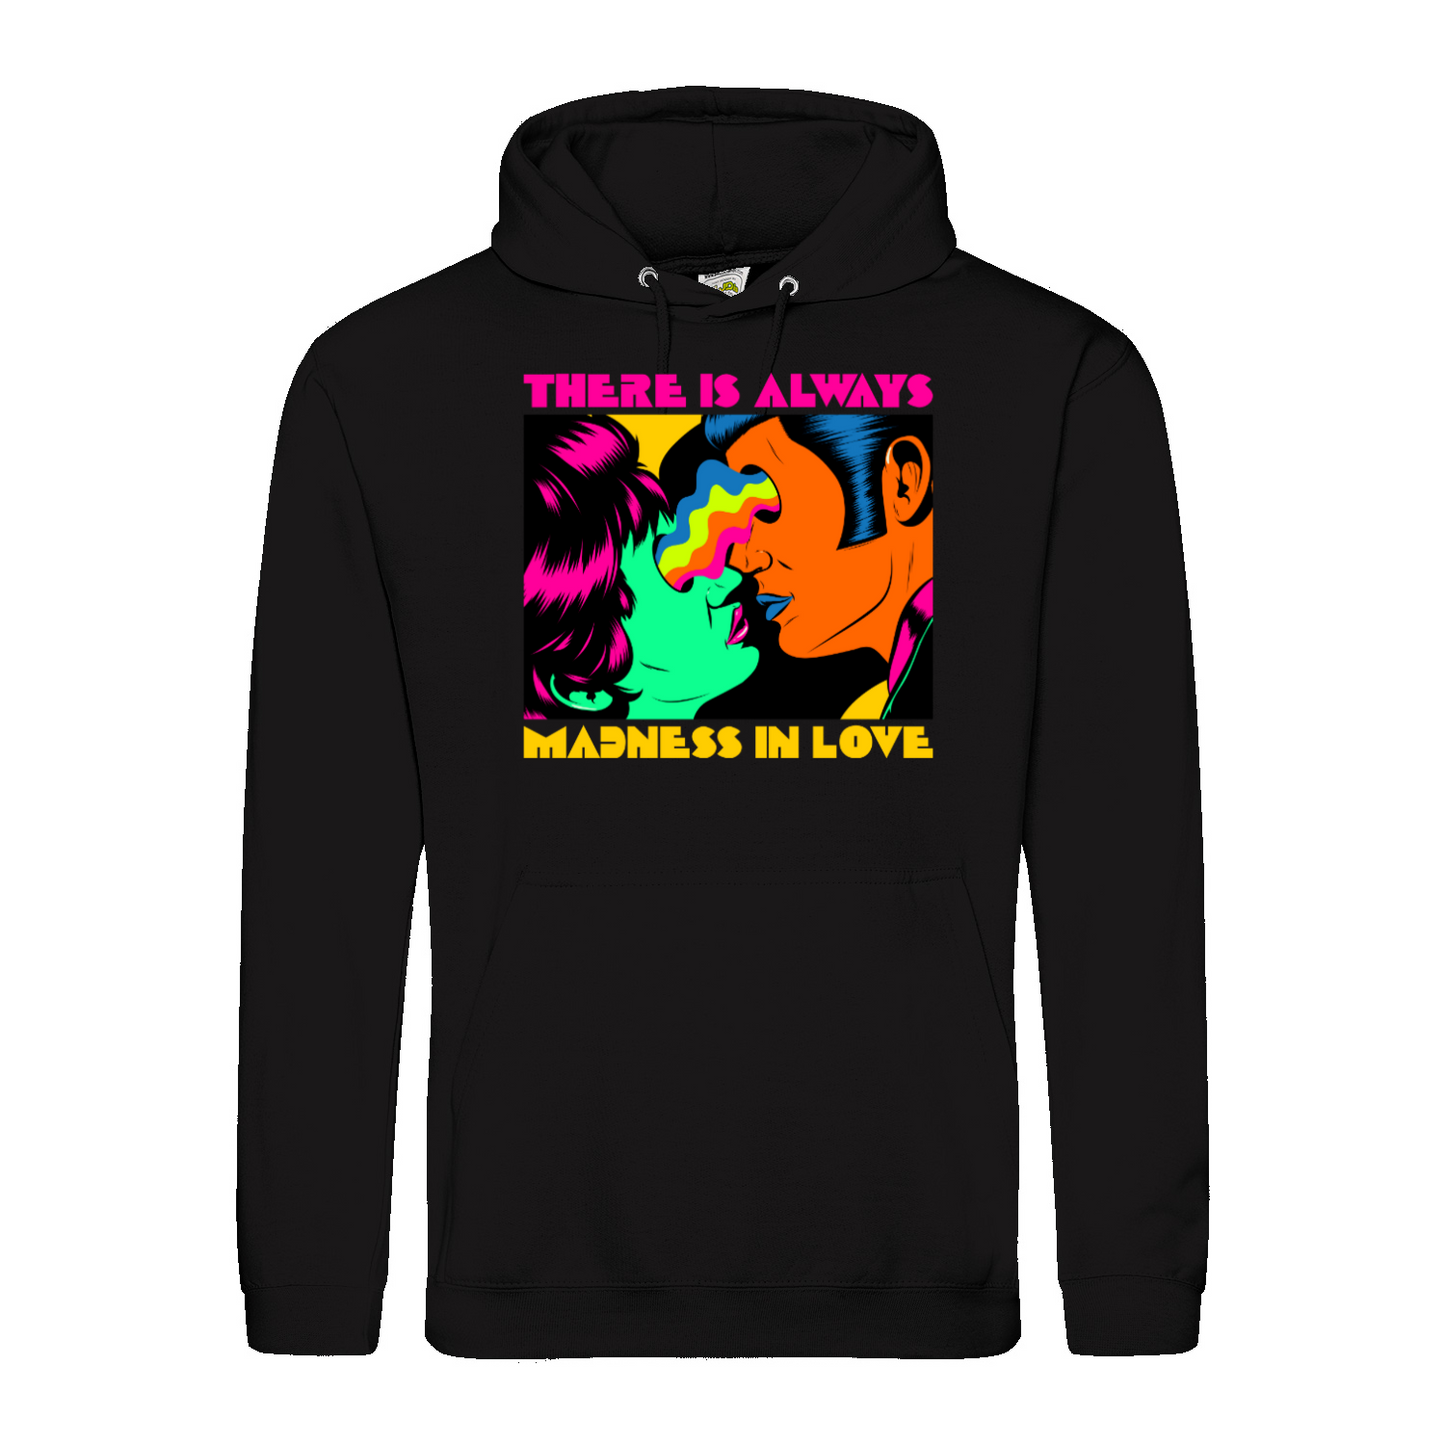 Limited Edition Hoodie "Madness in Love"